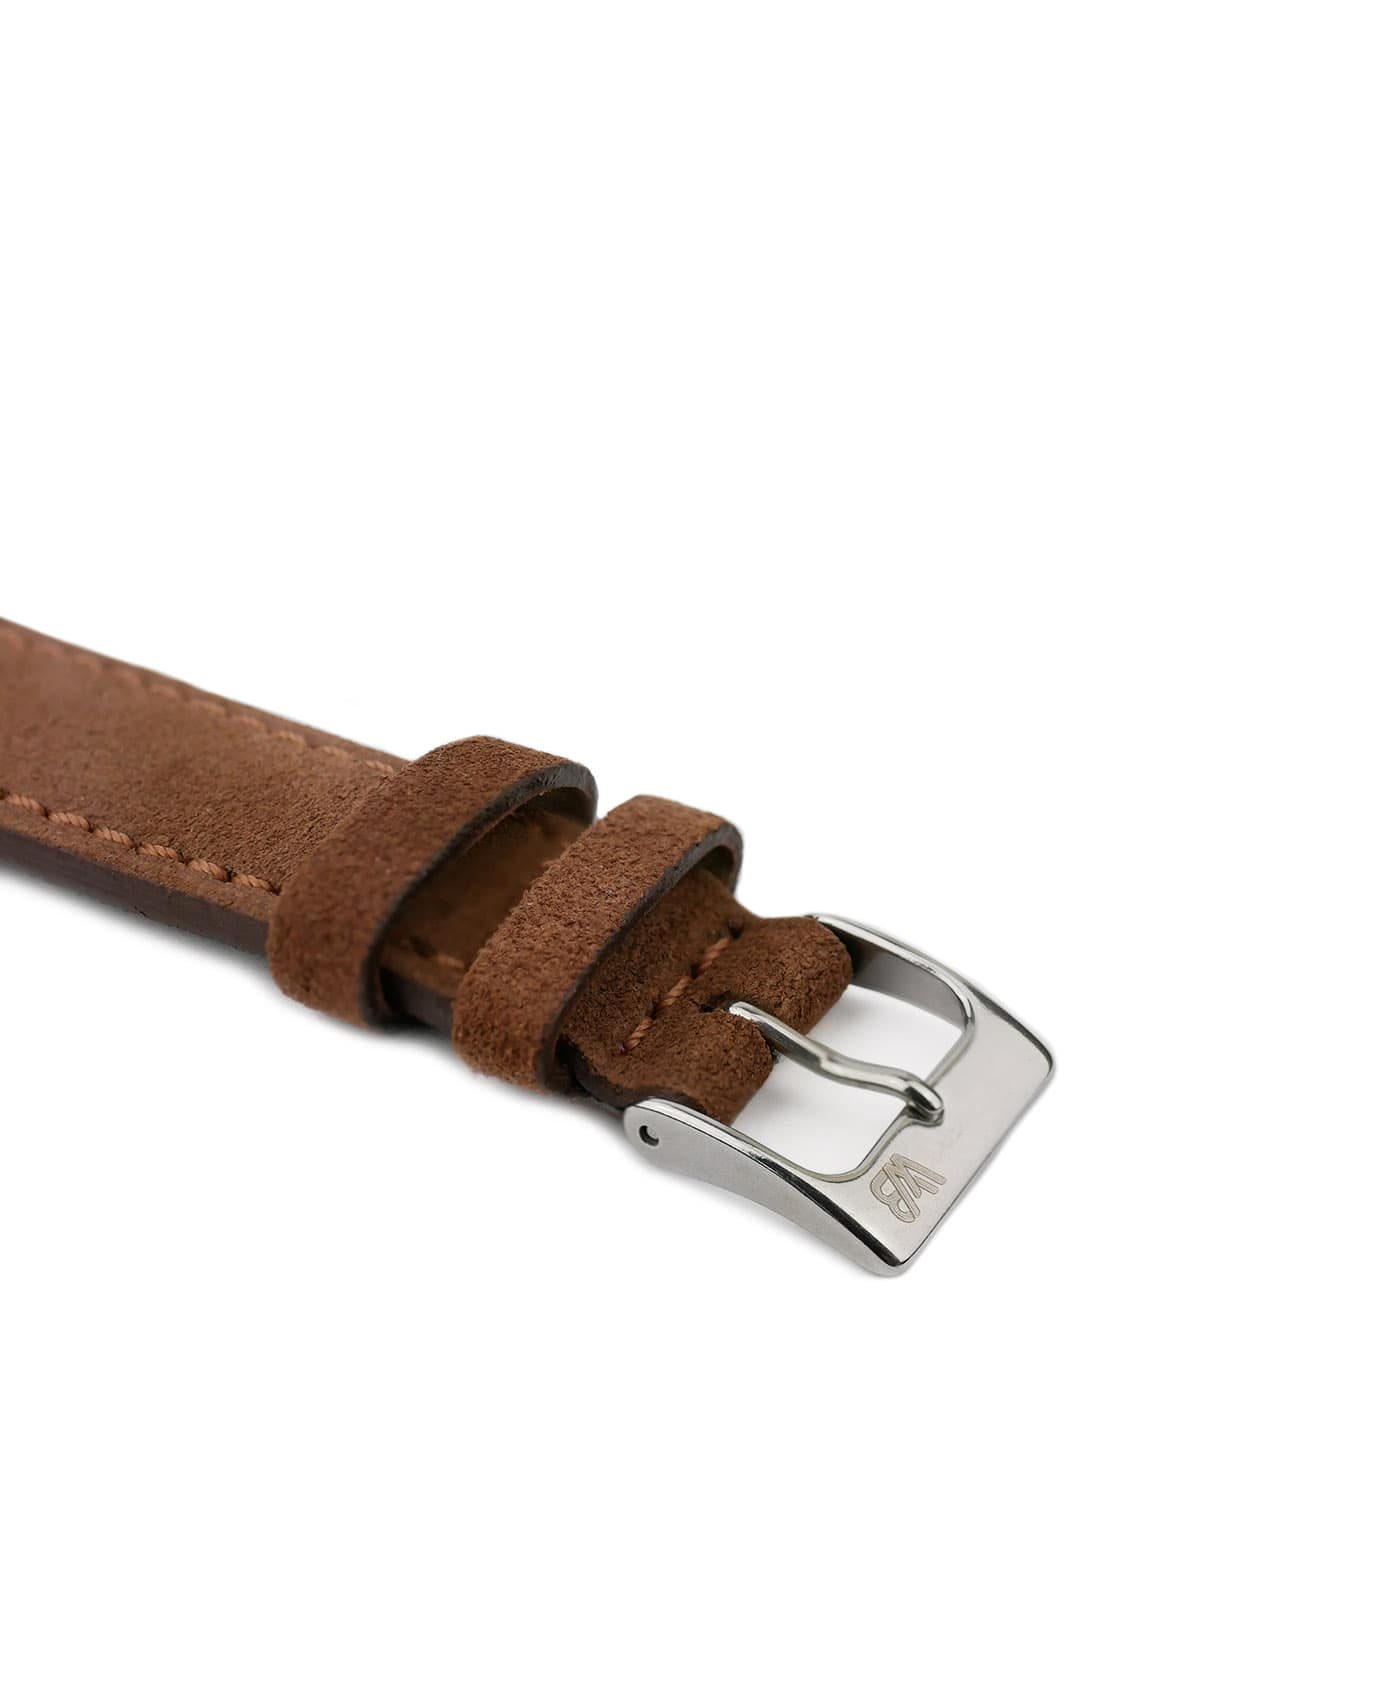 Suede leather strap with side seam_brown_side buckle